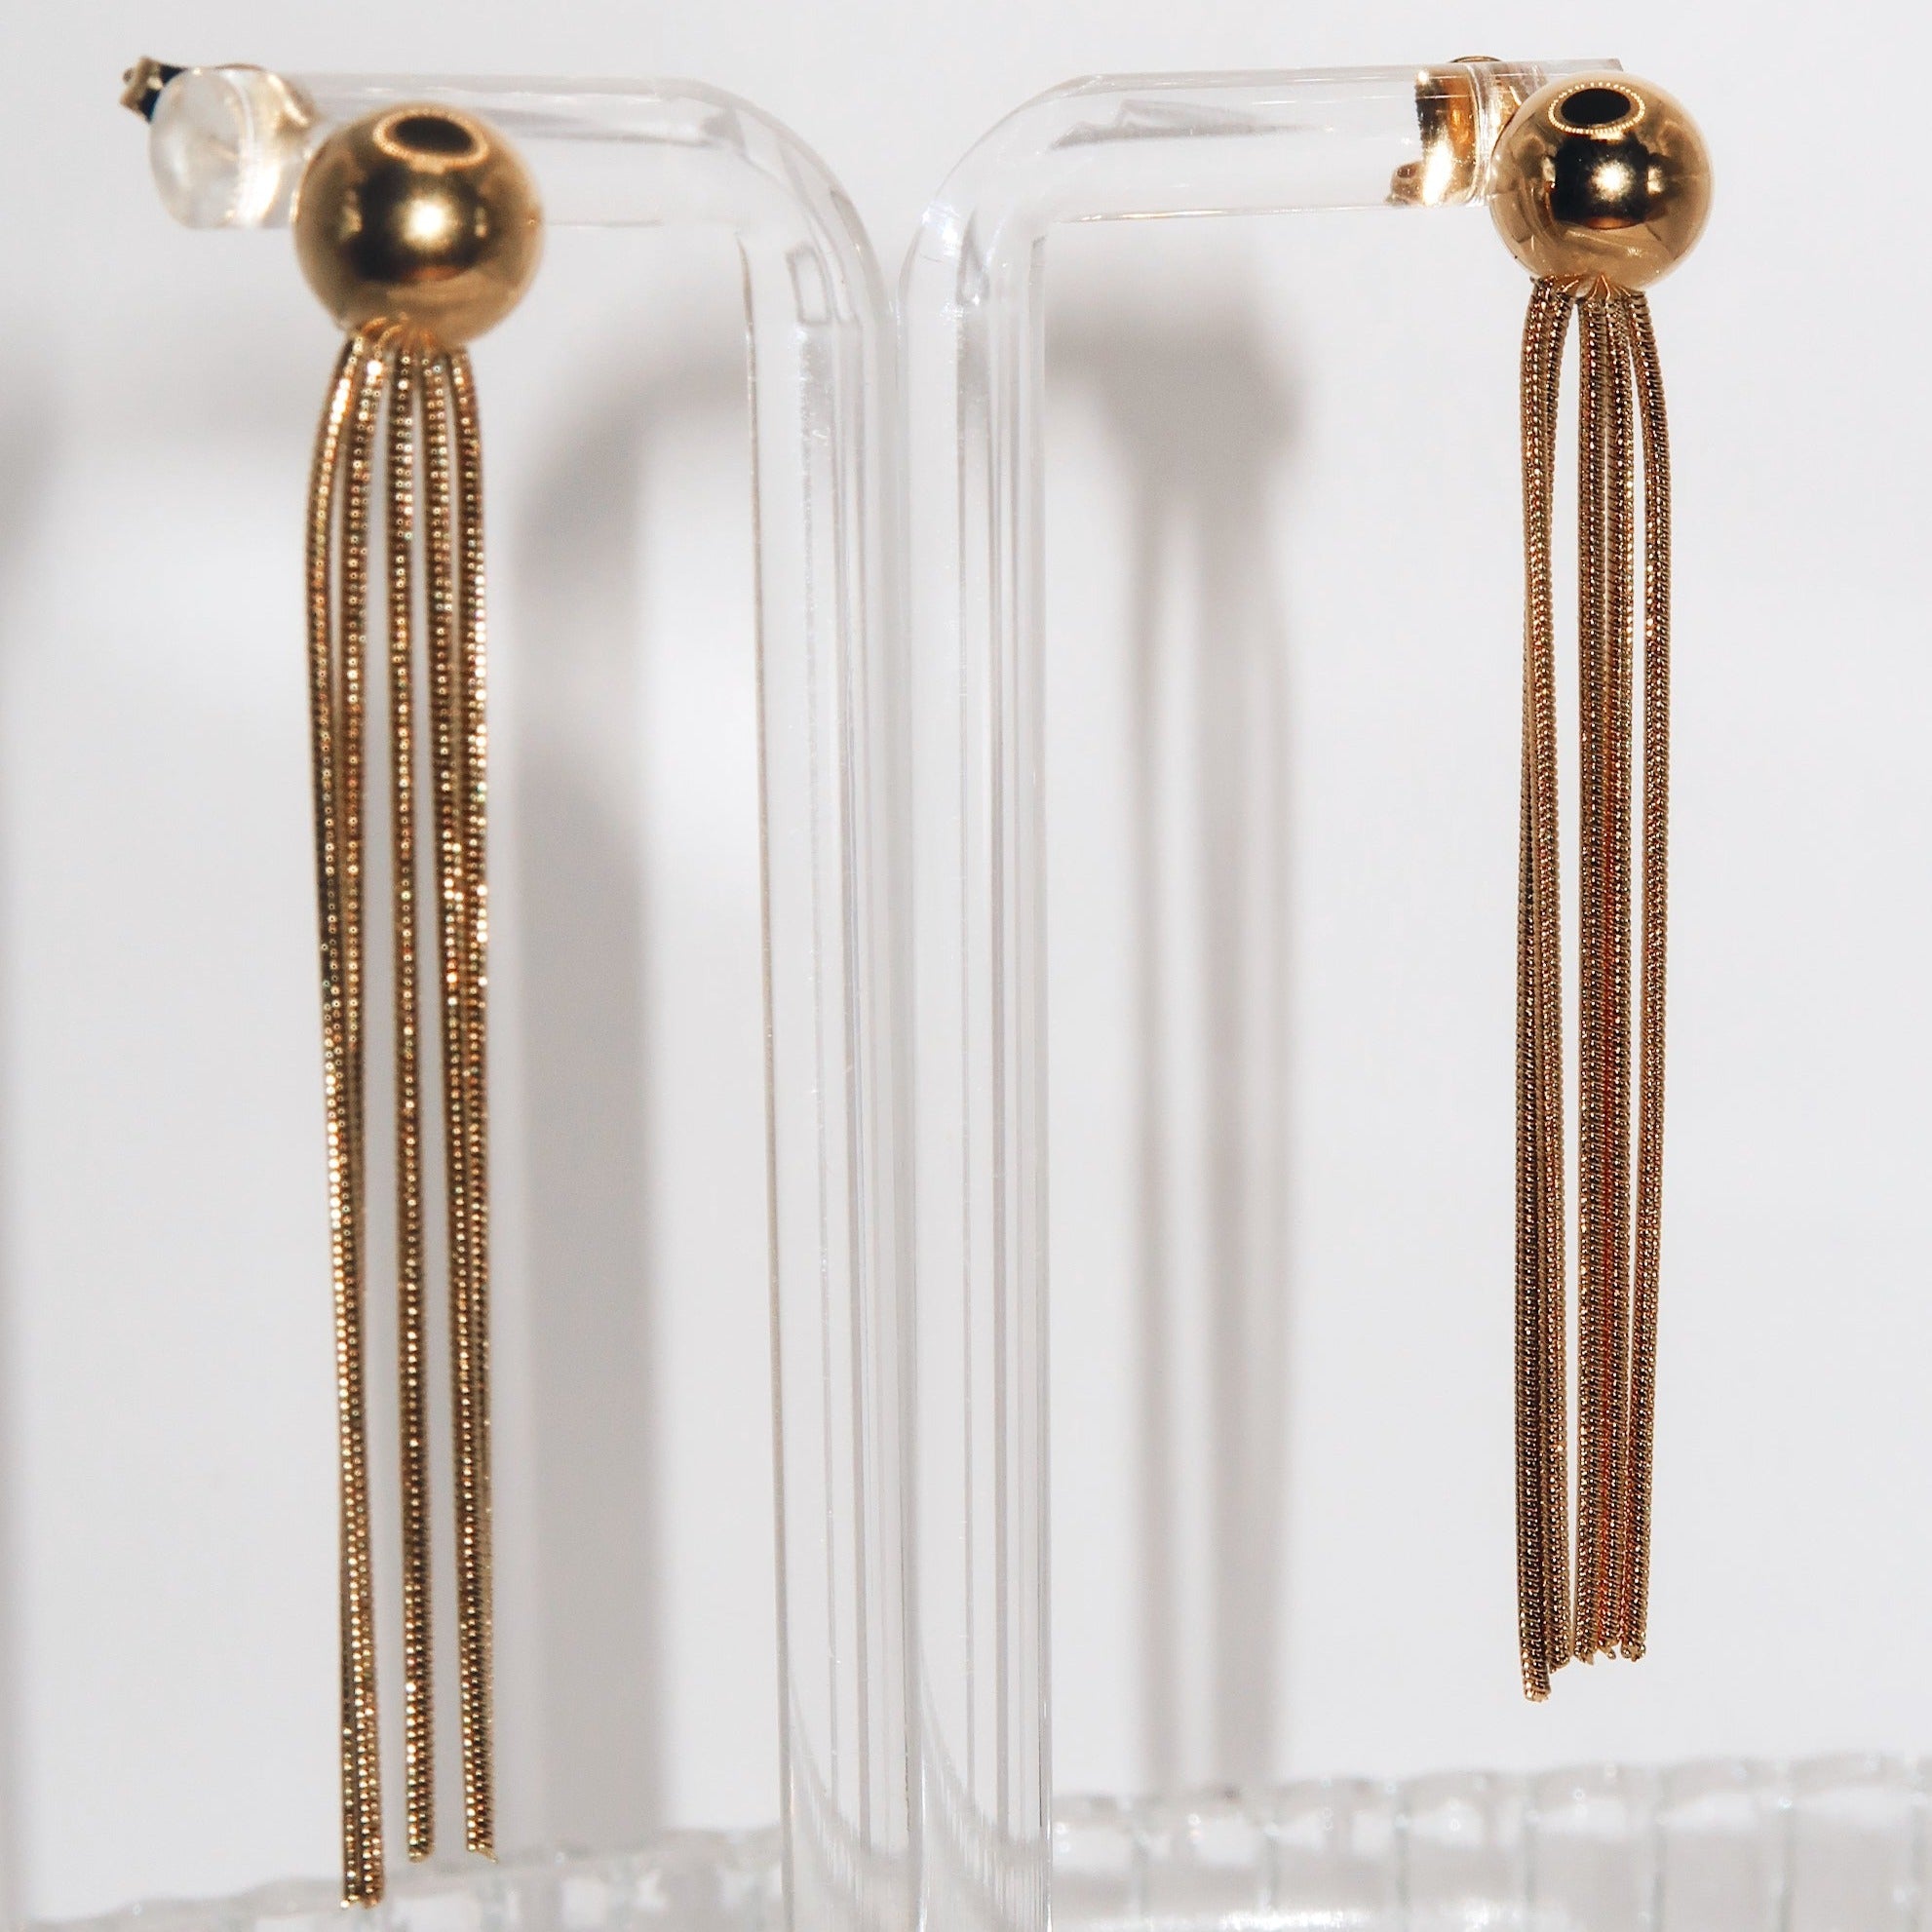 GABRIELLA - 18K PVD Gold Plated Dangling Earrings - Mixed Metals